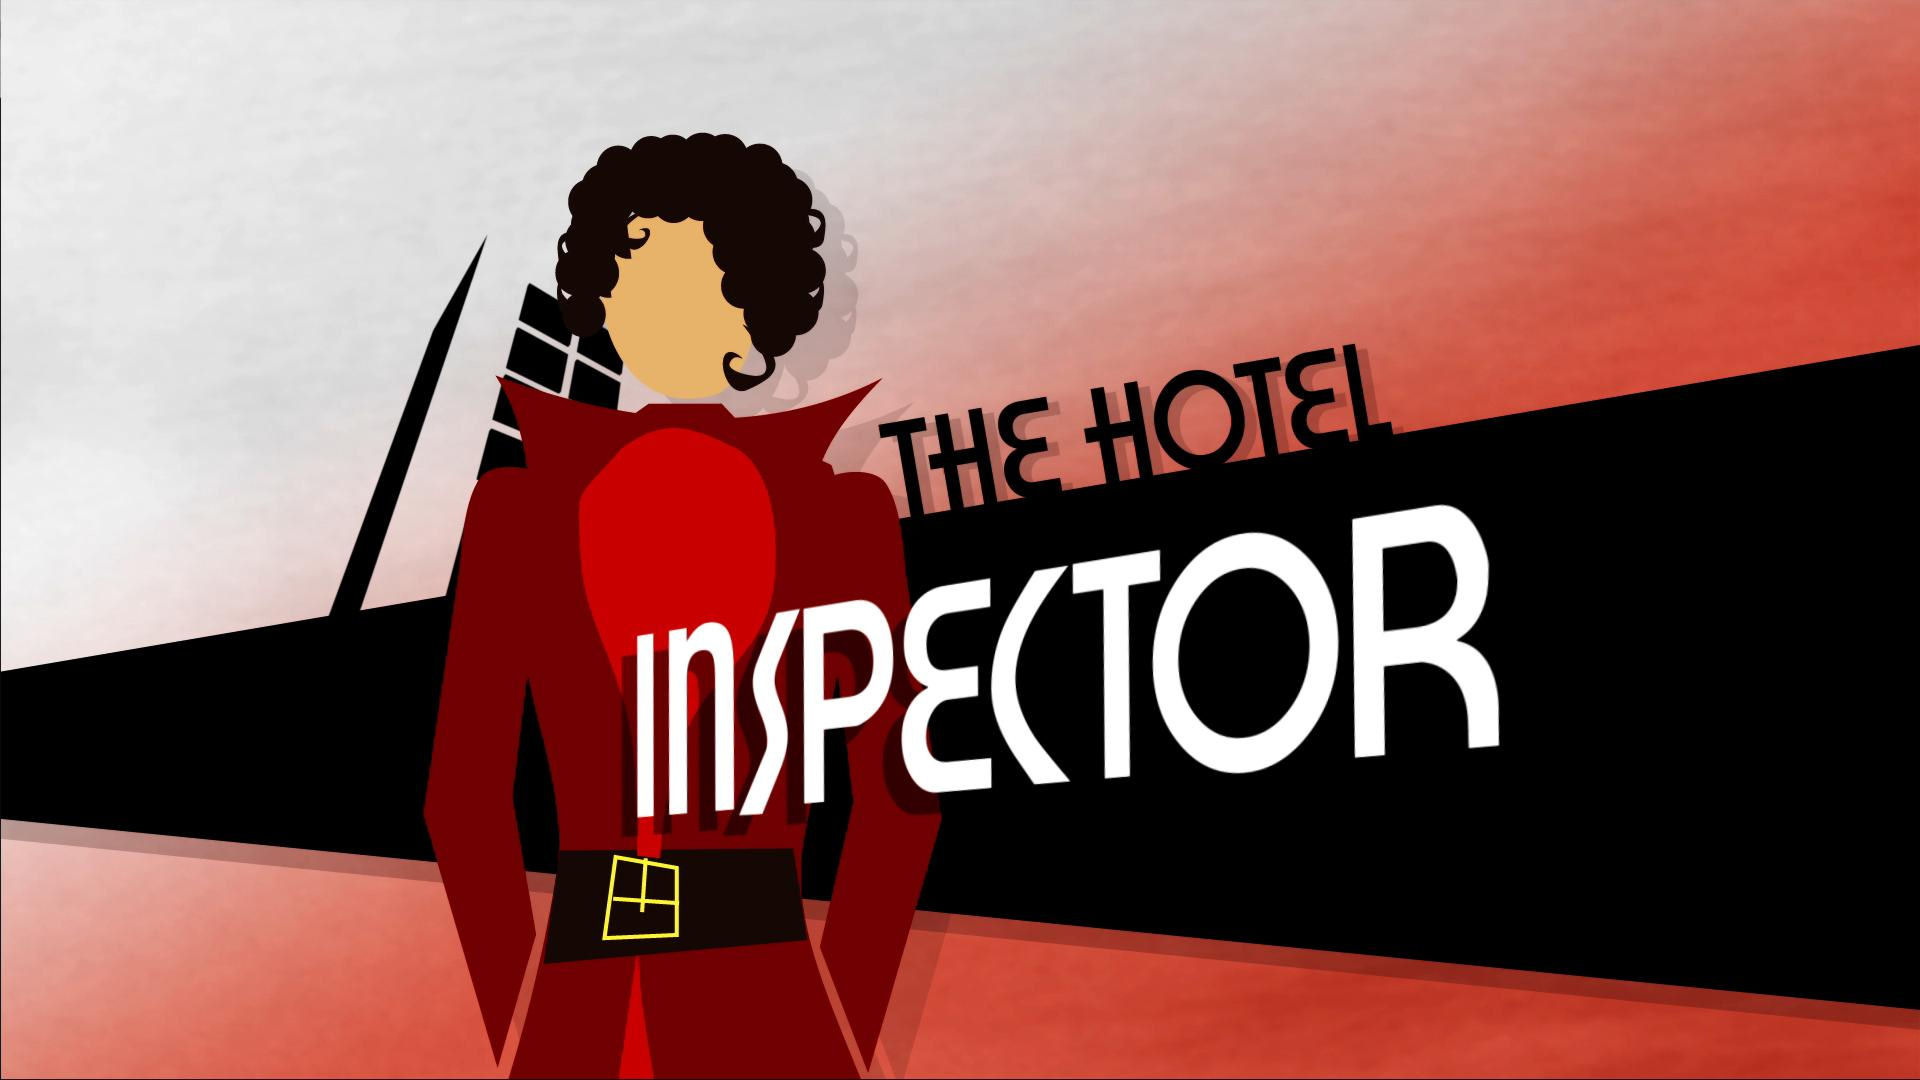 Show The Hotel Inspector